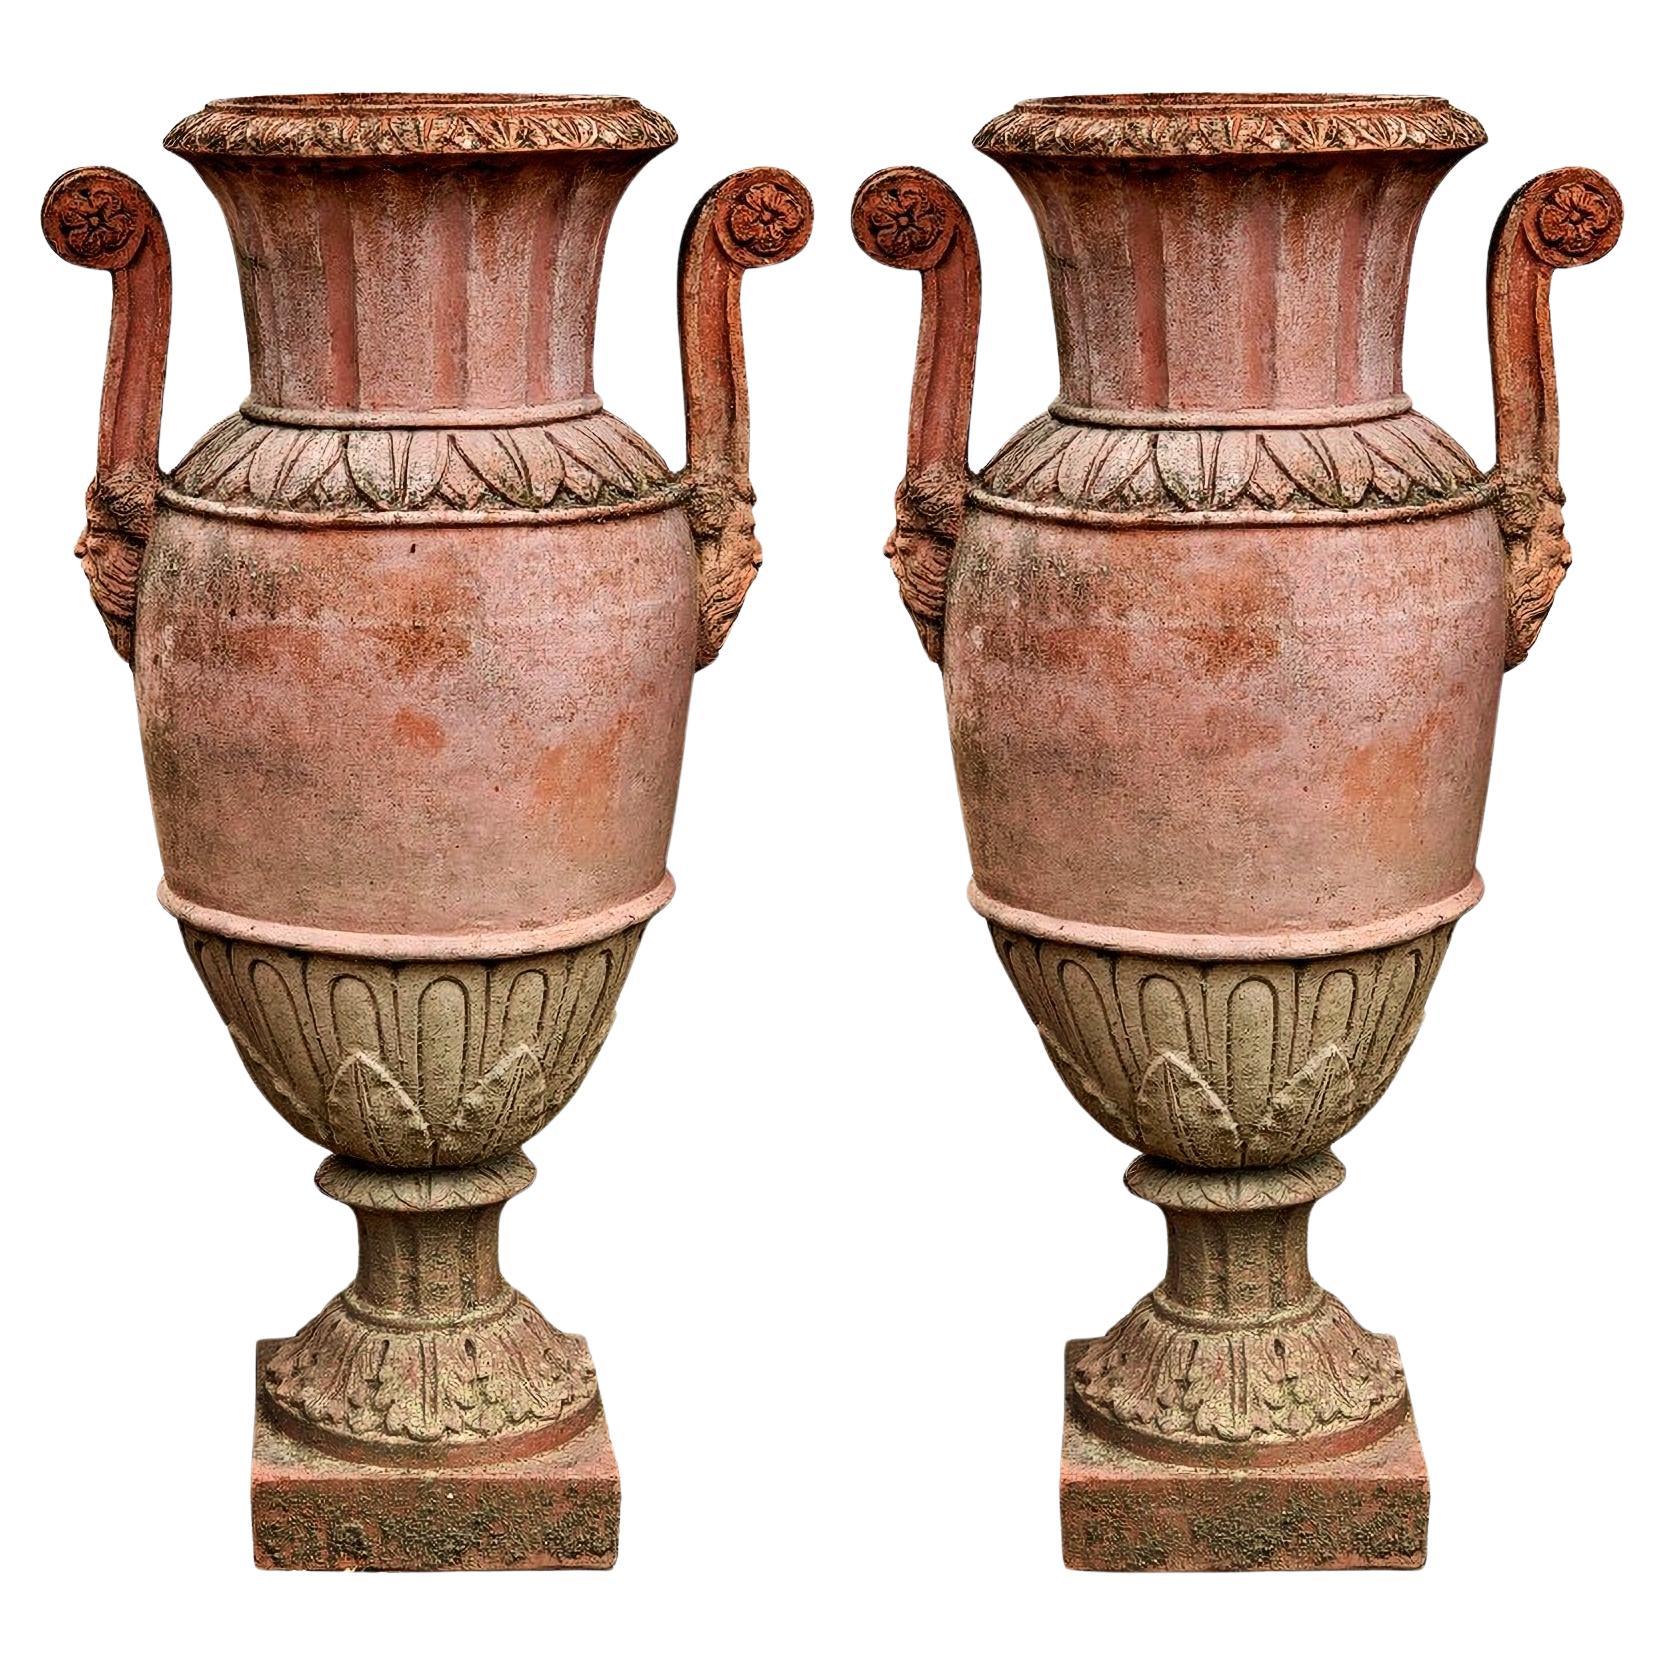 PAIR OF TUSCAN EMPIRE VASES WITH HANDLES TERRACOTTA IMPRUNETA FLORENCE 20th Cent